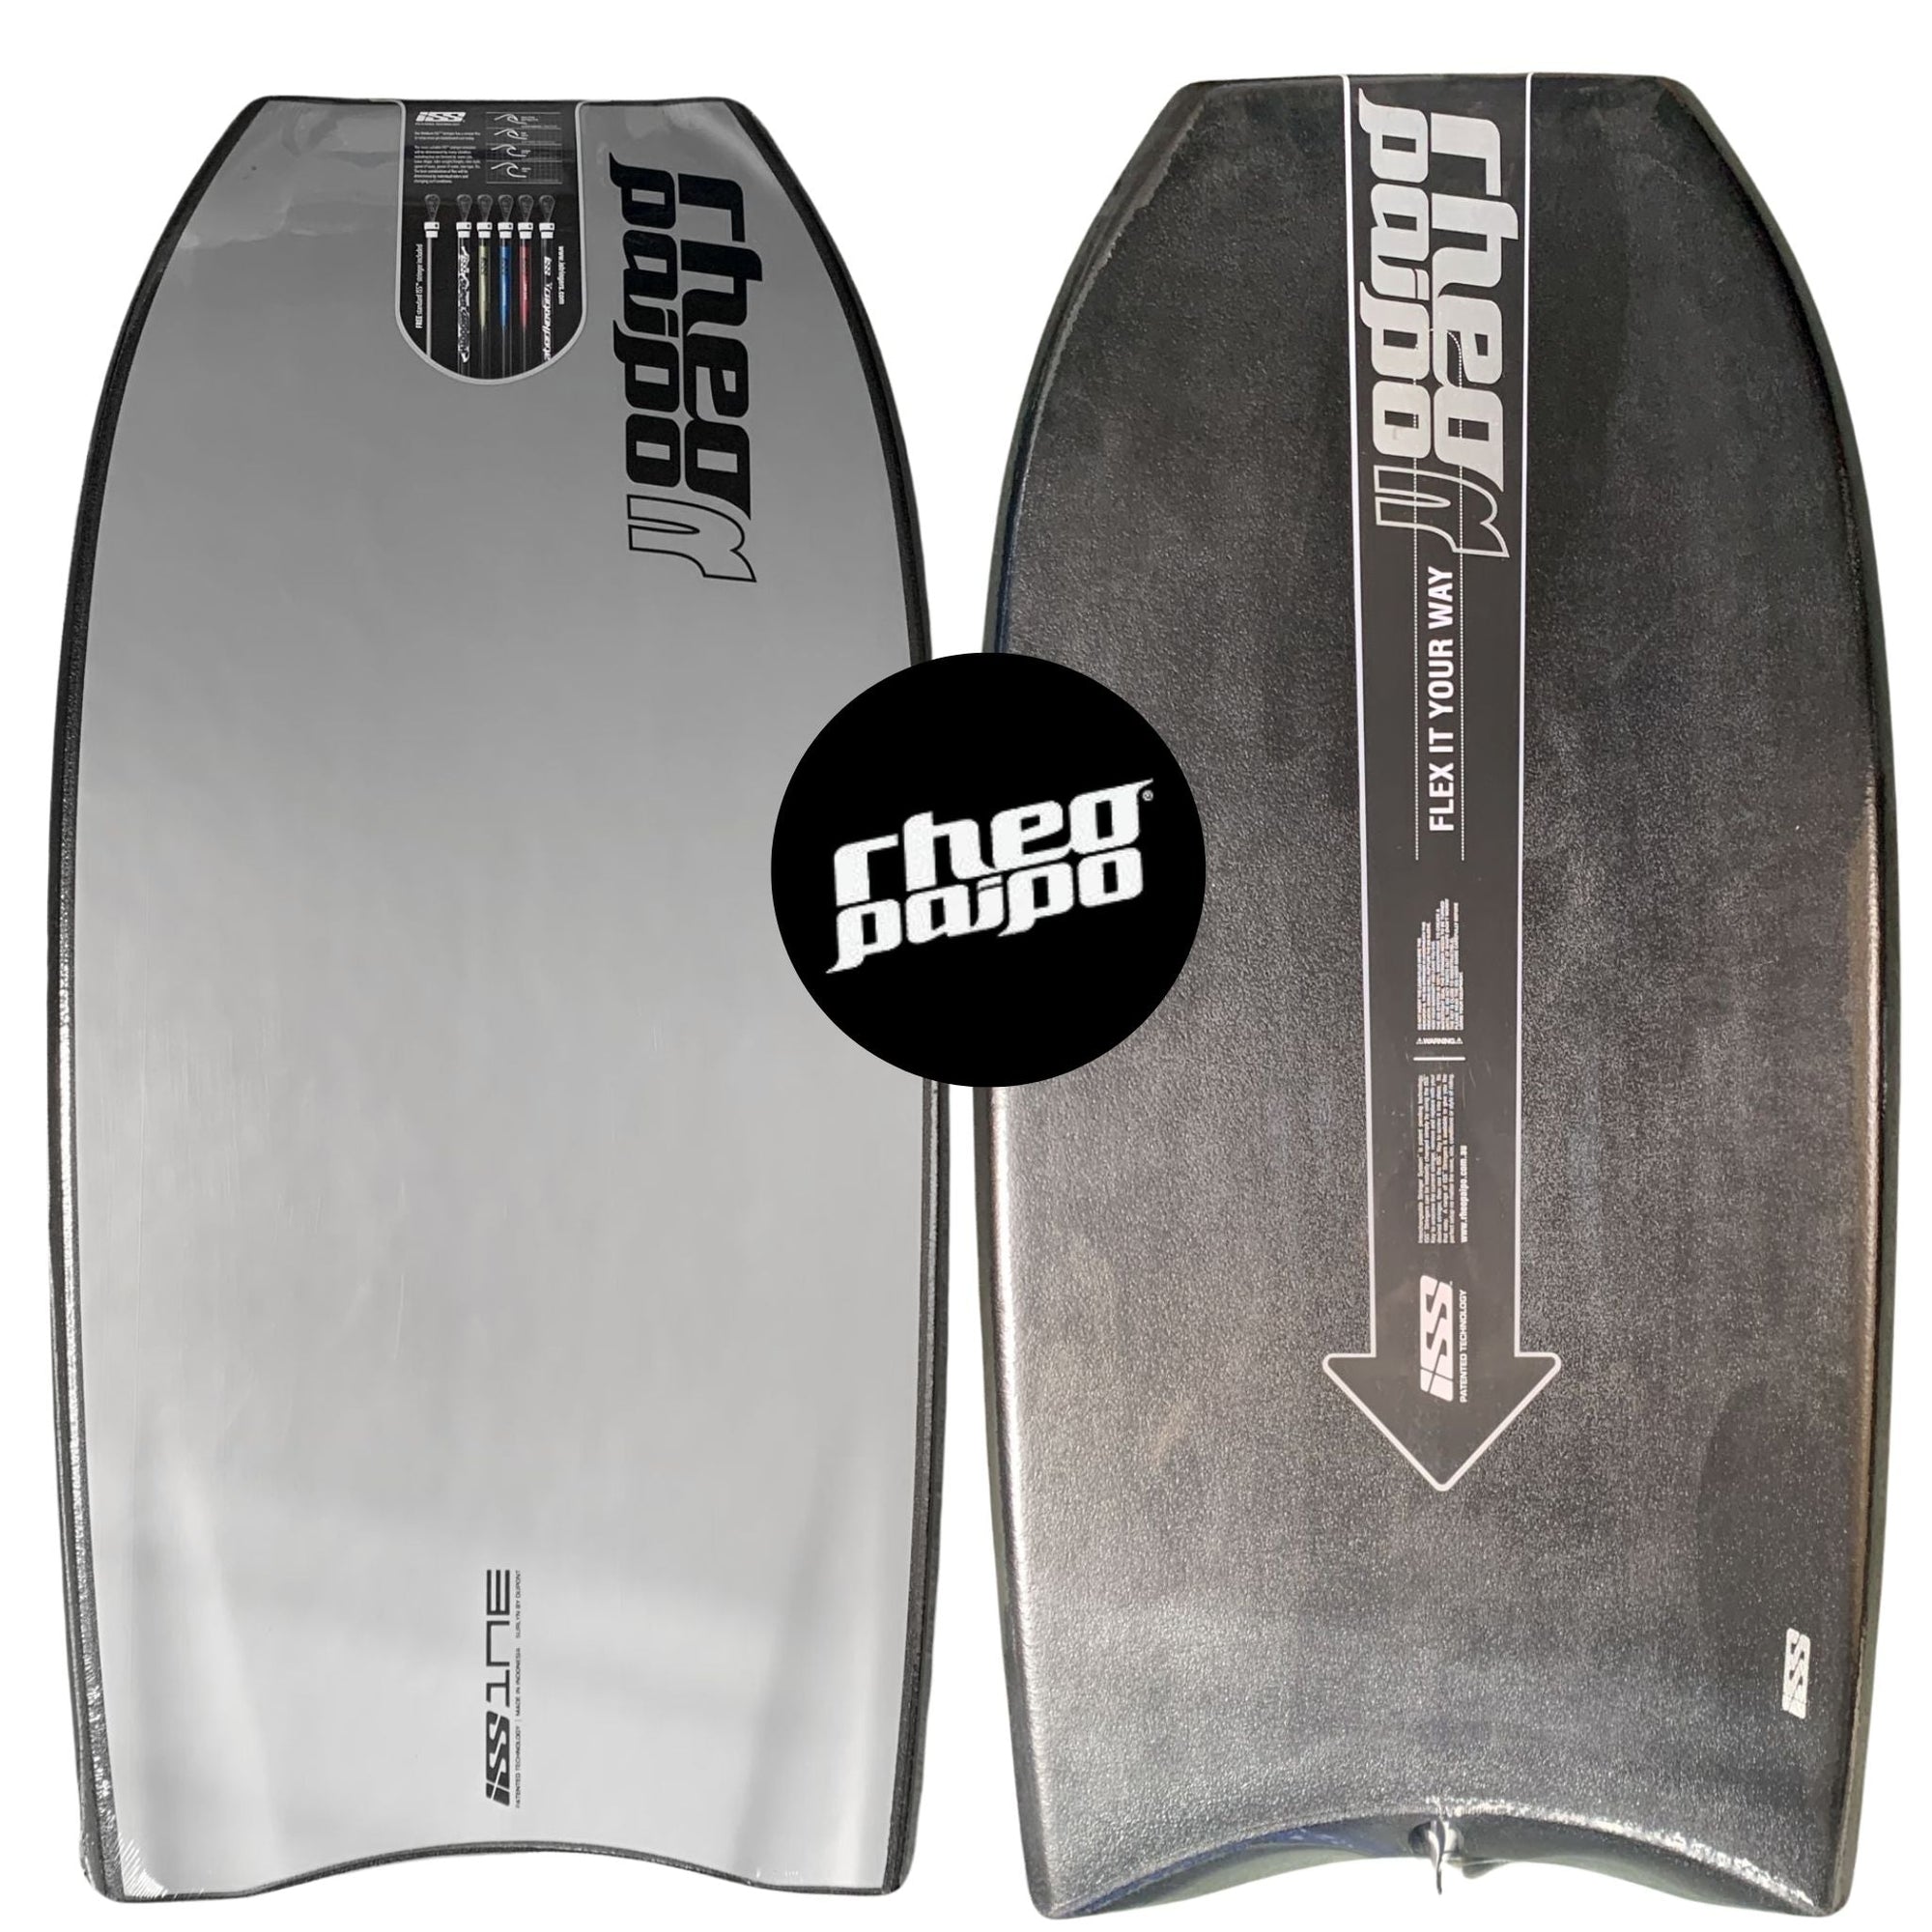 RheoPaipo ISS Body Board | SILVER/BLACK | PP KINETIC CORE | 1NE | 41" - South East Clearance Centre